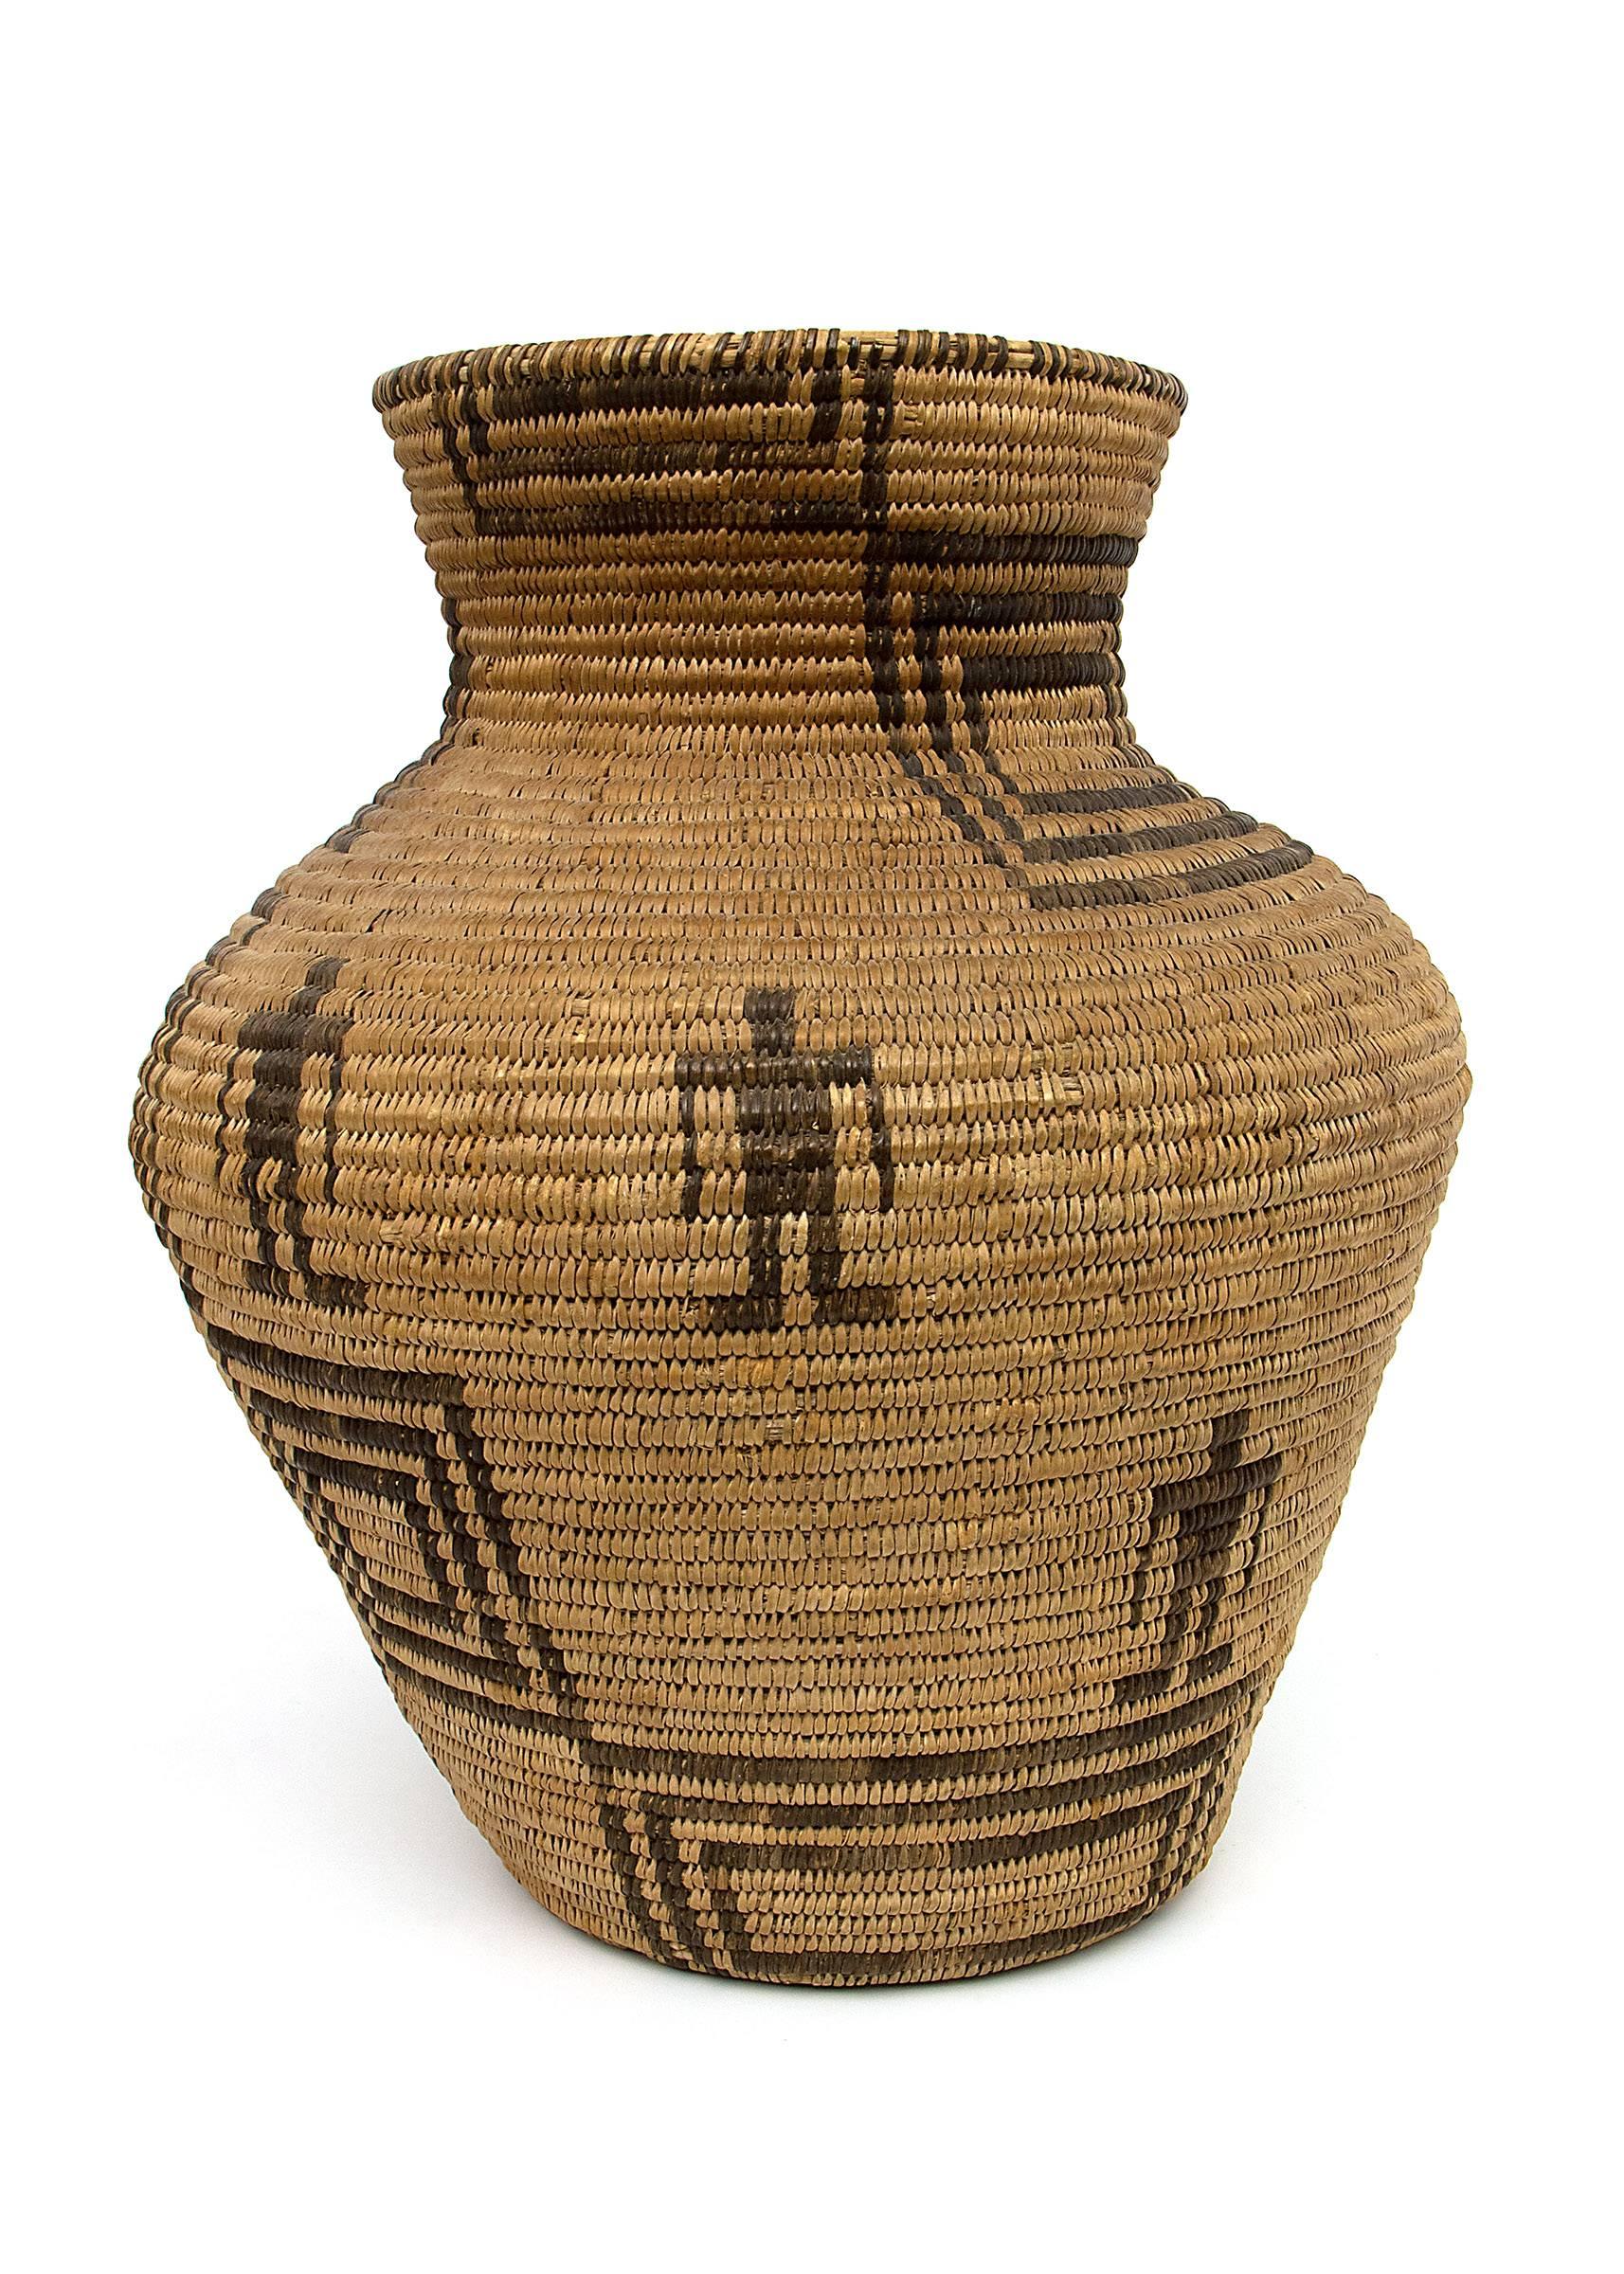 This antique North American Indian Olla is woven of willow and devil's claw with geometric and humanoid elements. The Apache, a nomadic American Indian tribe, followed the buffalo and ranged across the American Southwest including areas of Arizona,